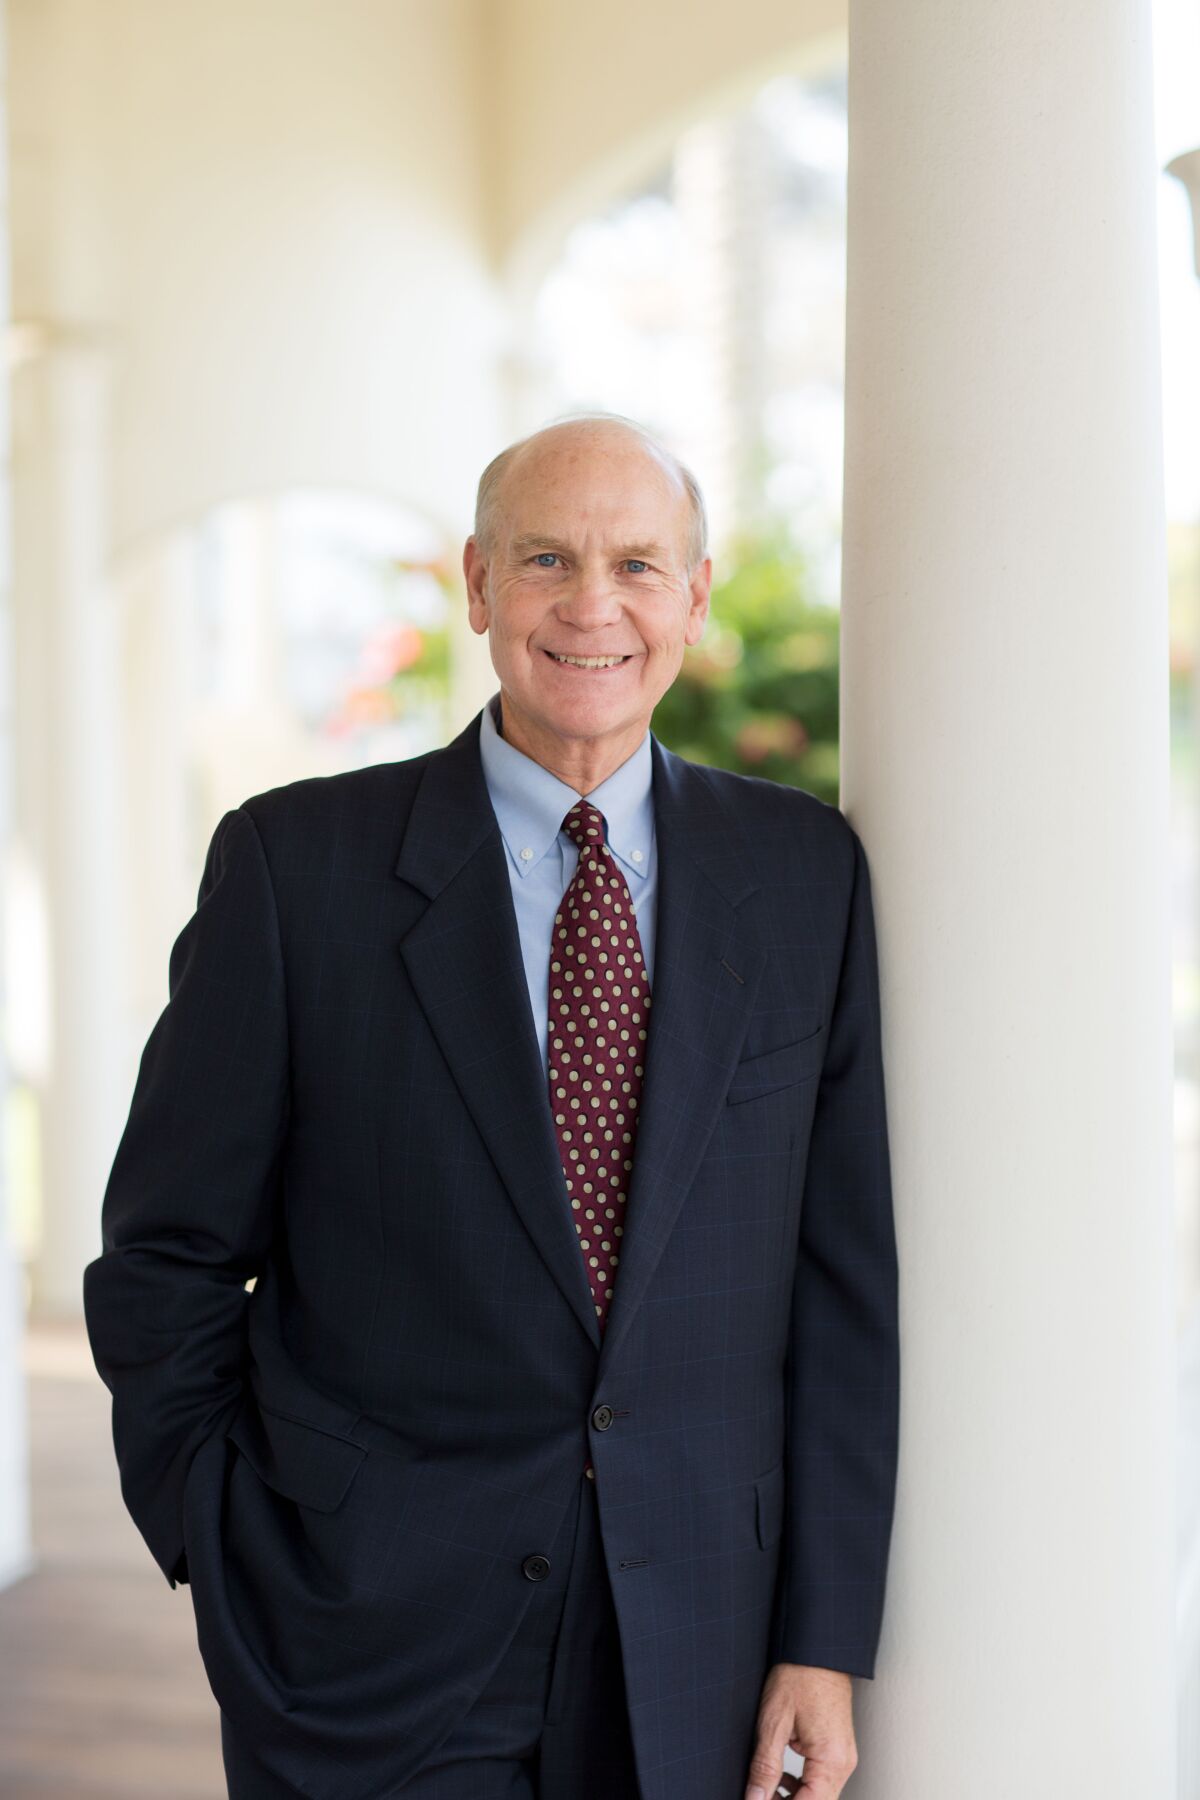 Bob Brower is the president of Point Loma Nazarene University.